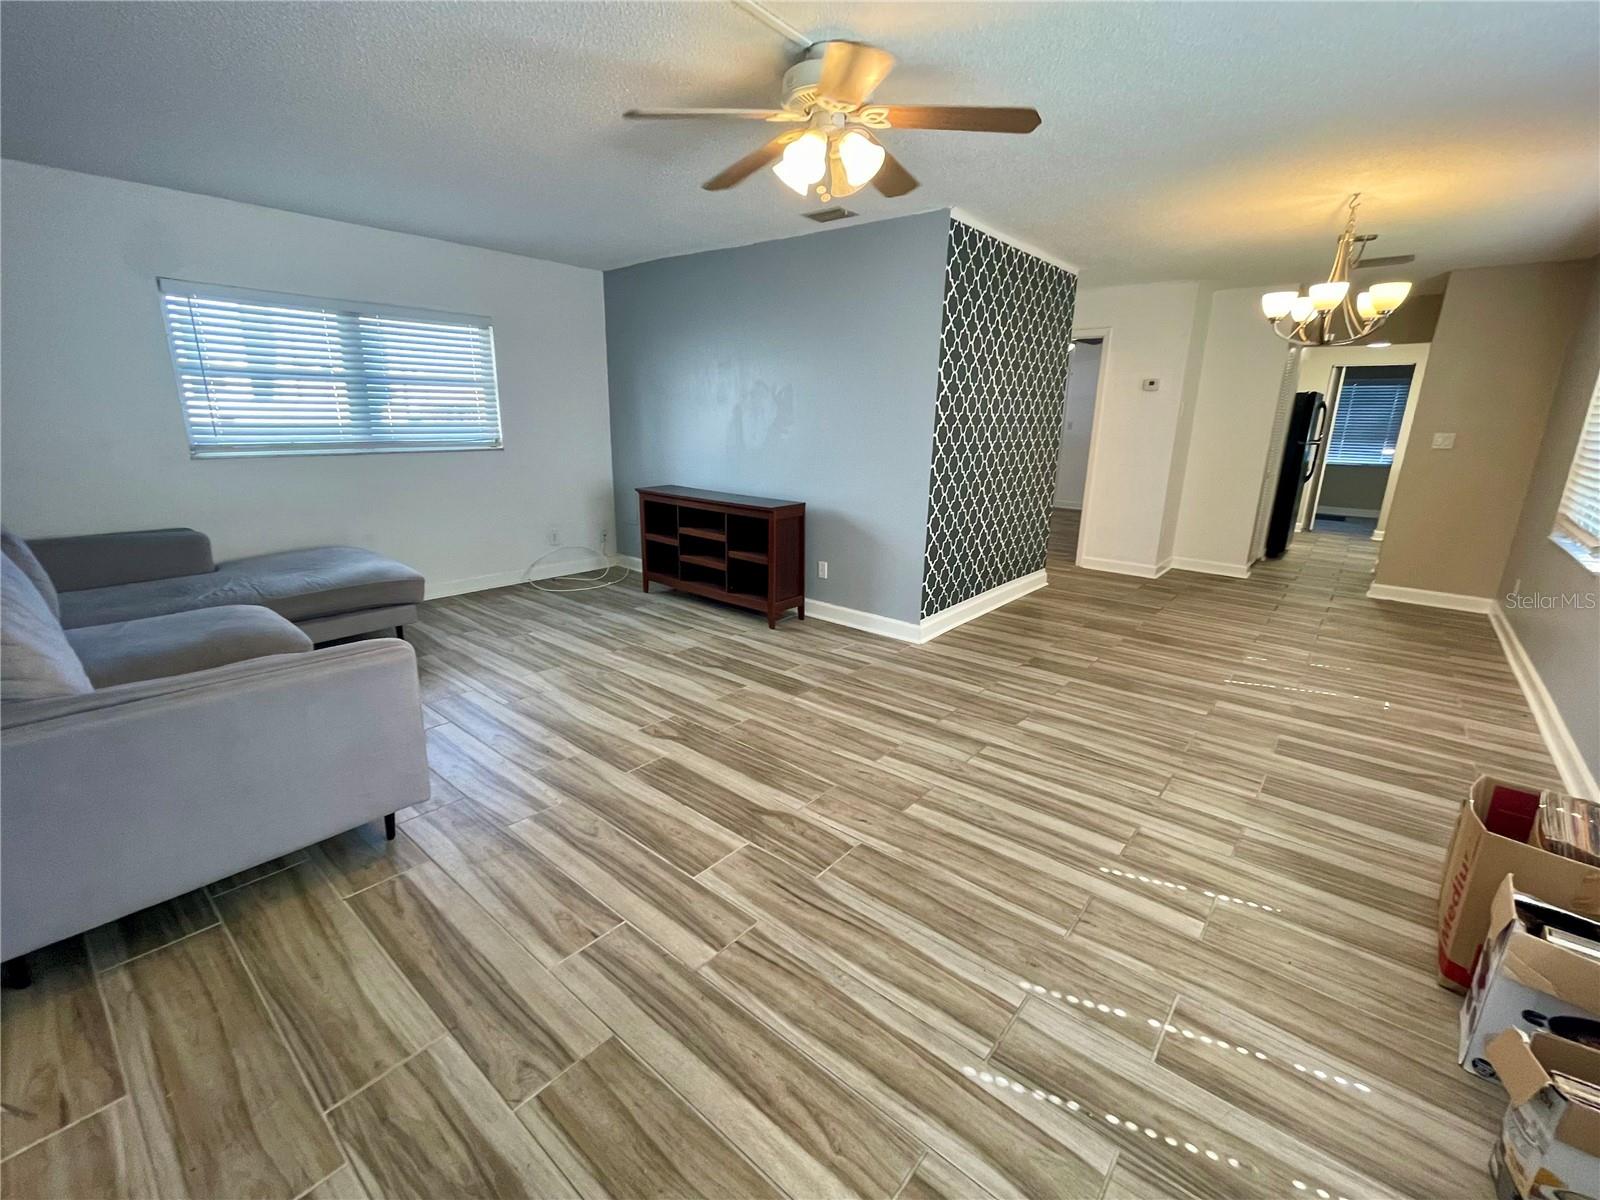 Living room, ceramic tile/wood look flooring throughout the home